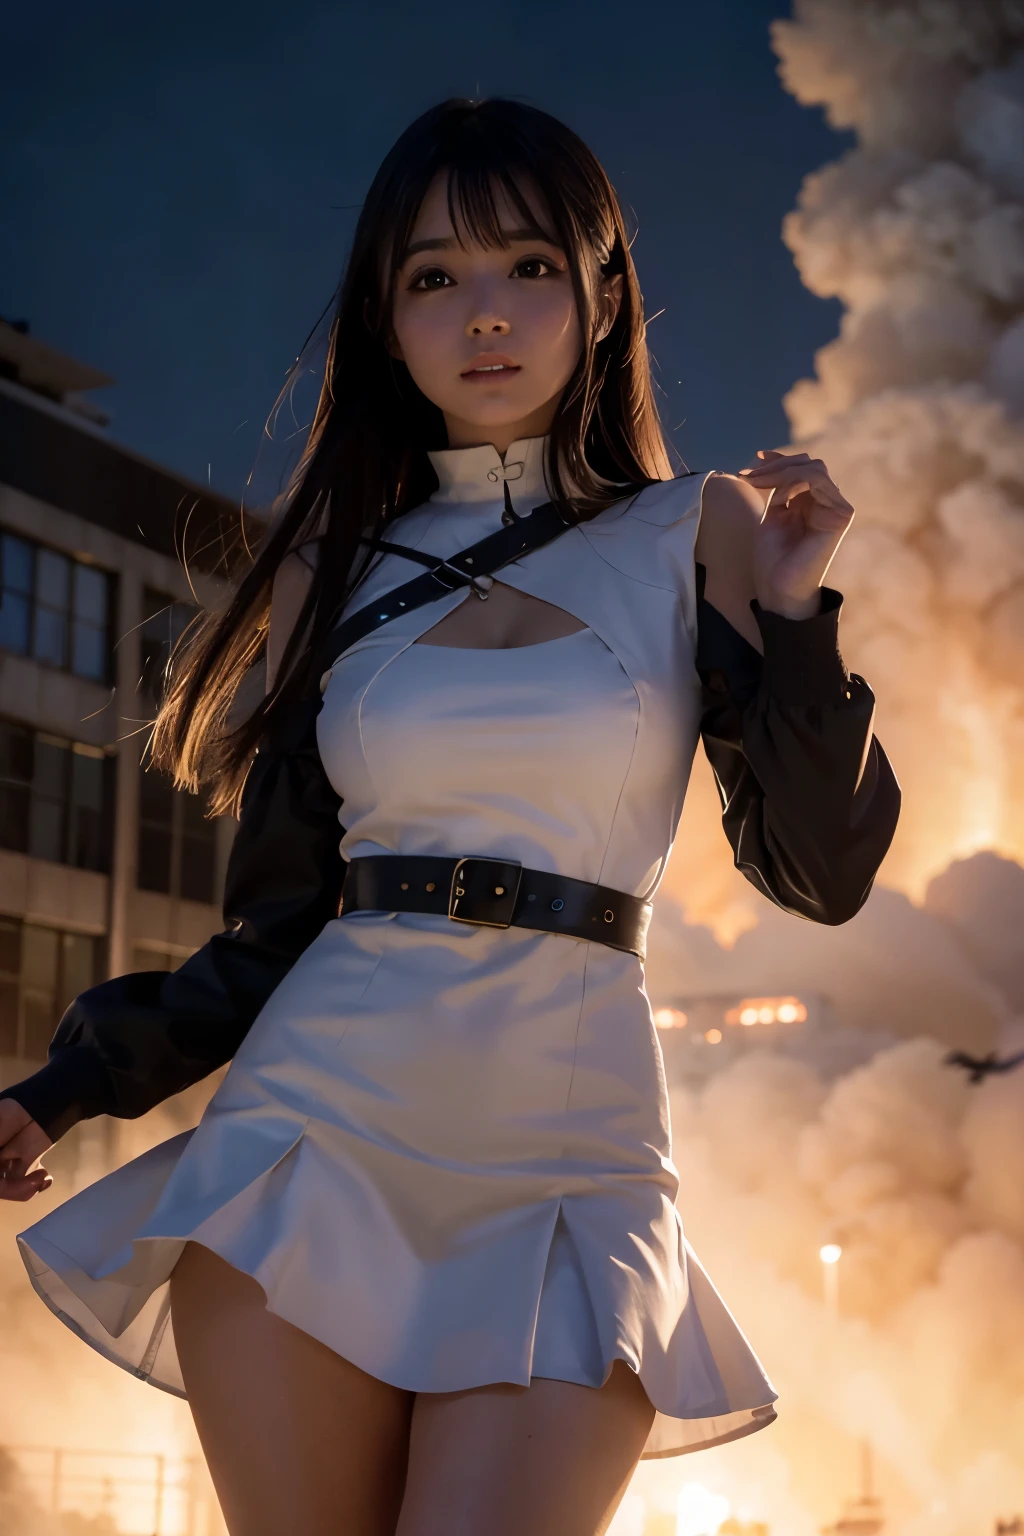 Giantess wearing short dress, GTS city of the year 3333, City buildings, smoke billowing, nube, Tornado, lightning strikes, Evil, realistic lighting, high jump, from low, birds flying,